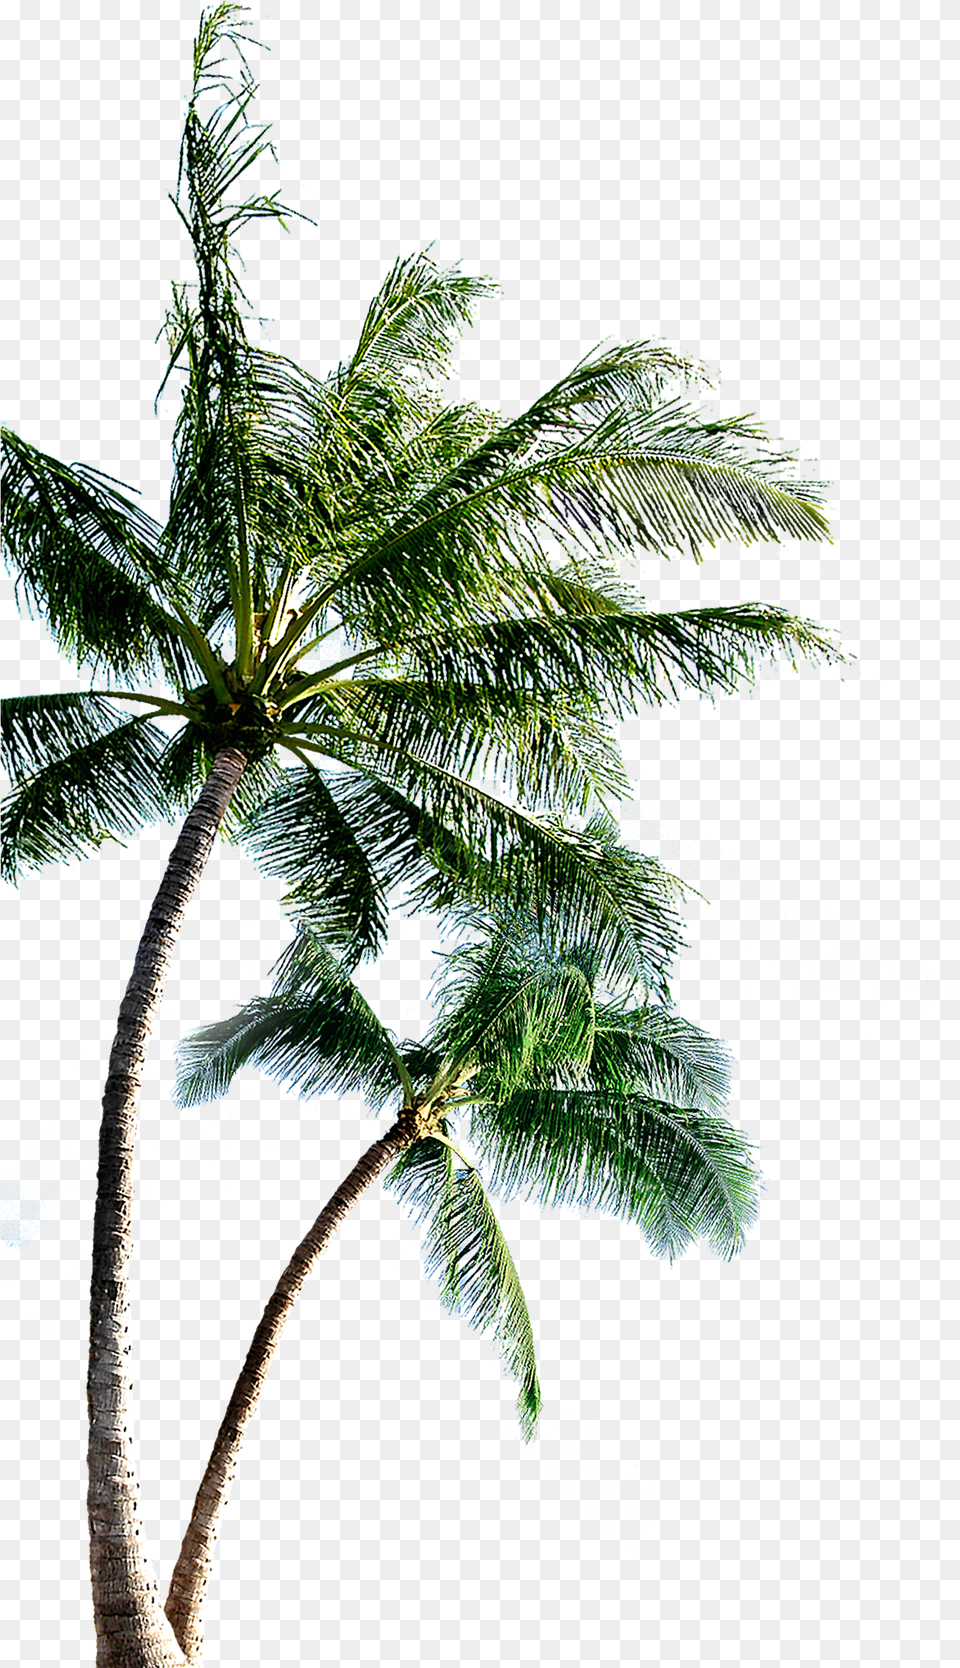 Fir Autocad Family Island Scalable Pine Vector Hq Coconut Tree Images, Leaf, Palm Tree, Plant, Summer Free Png Download